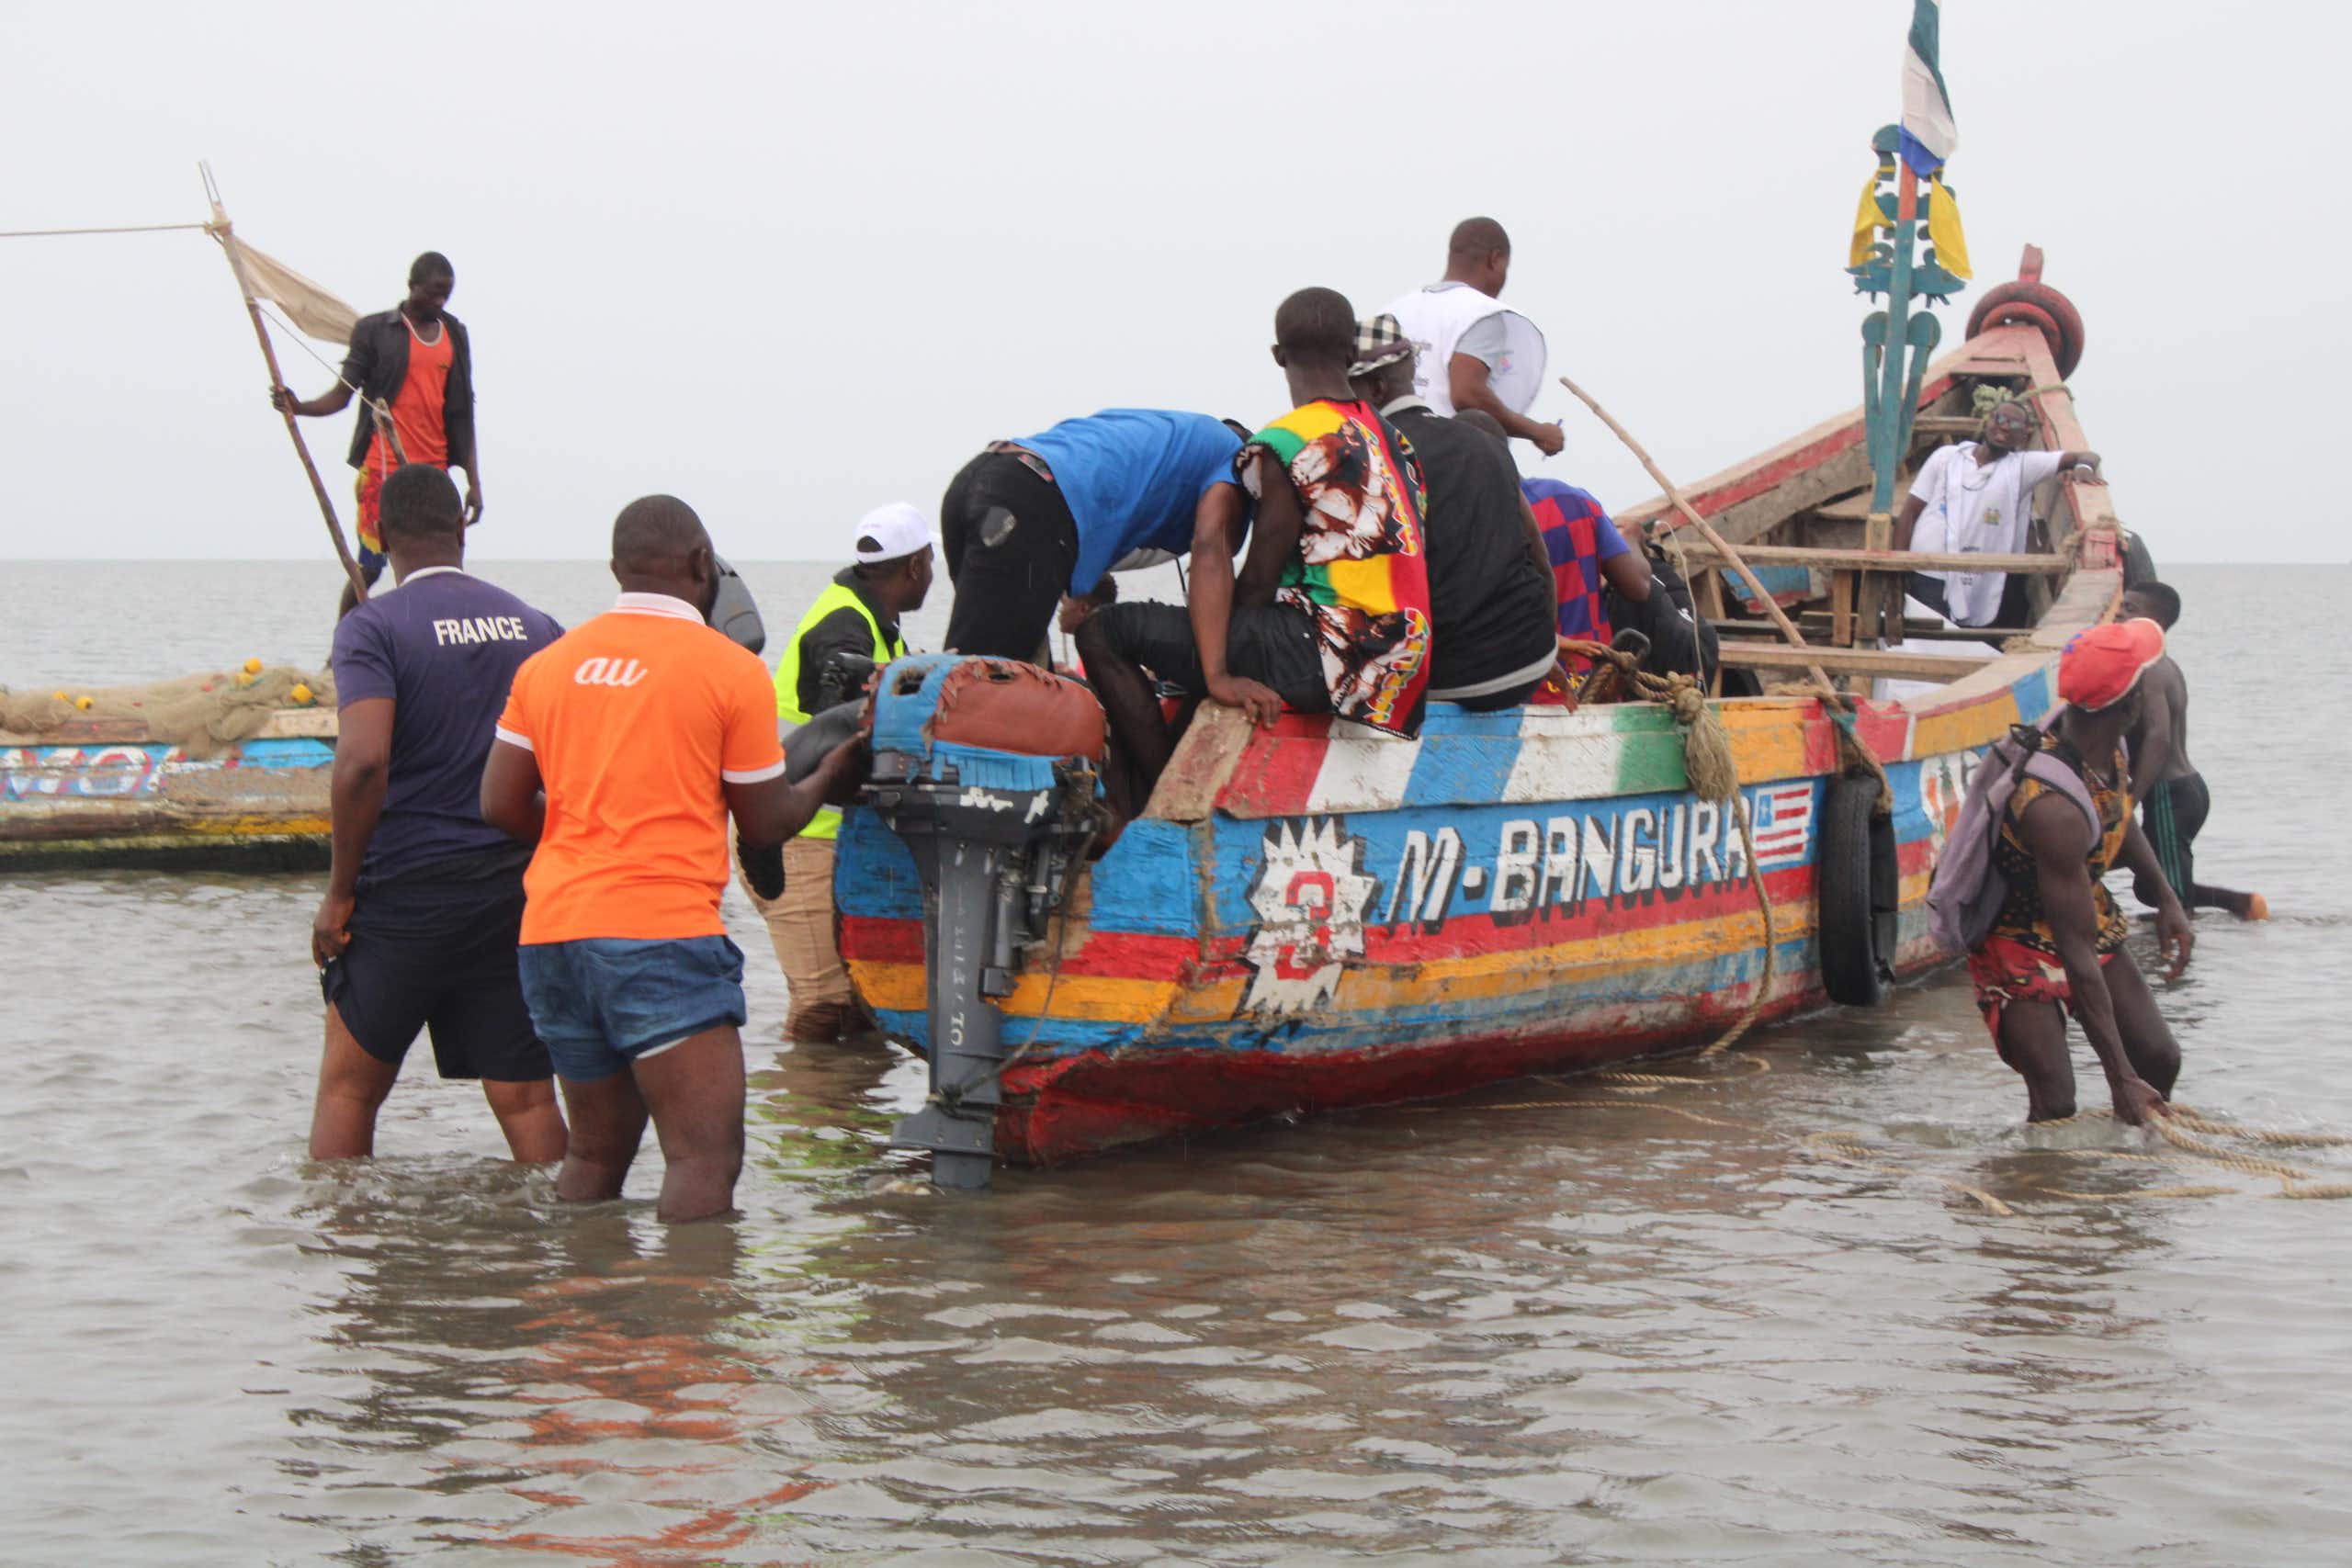 A colourfully painted small boat in shallow water with people standing around and in it.